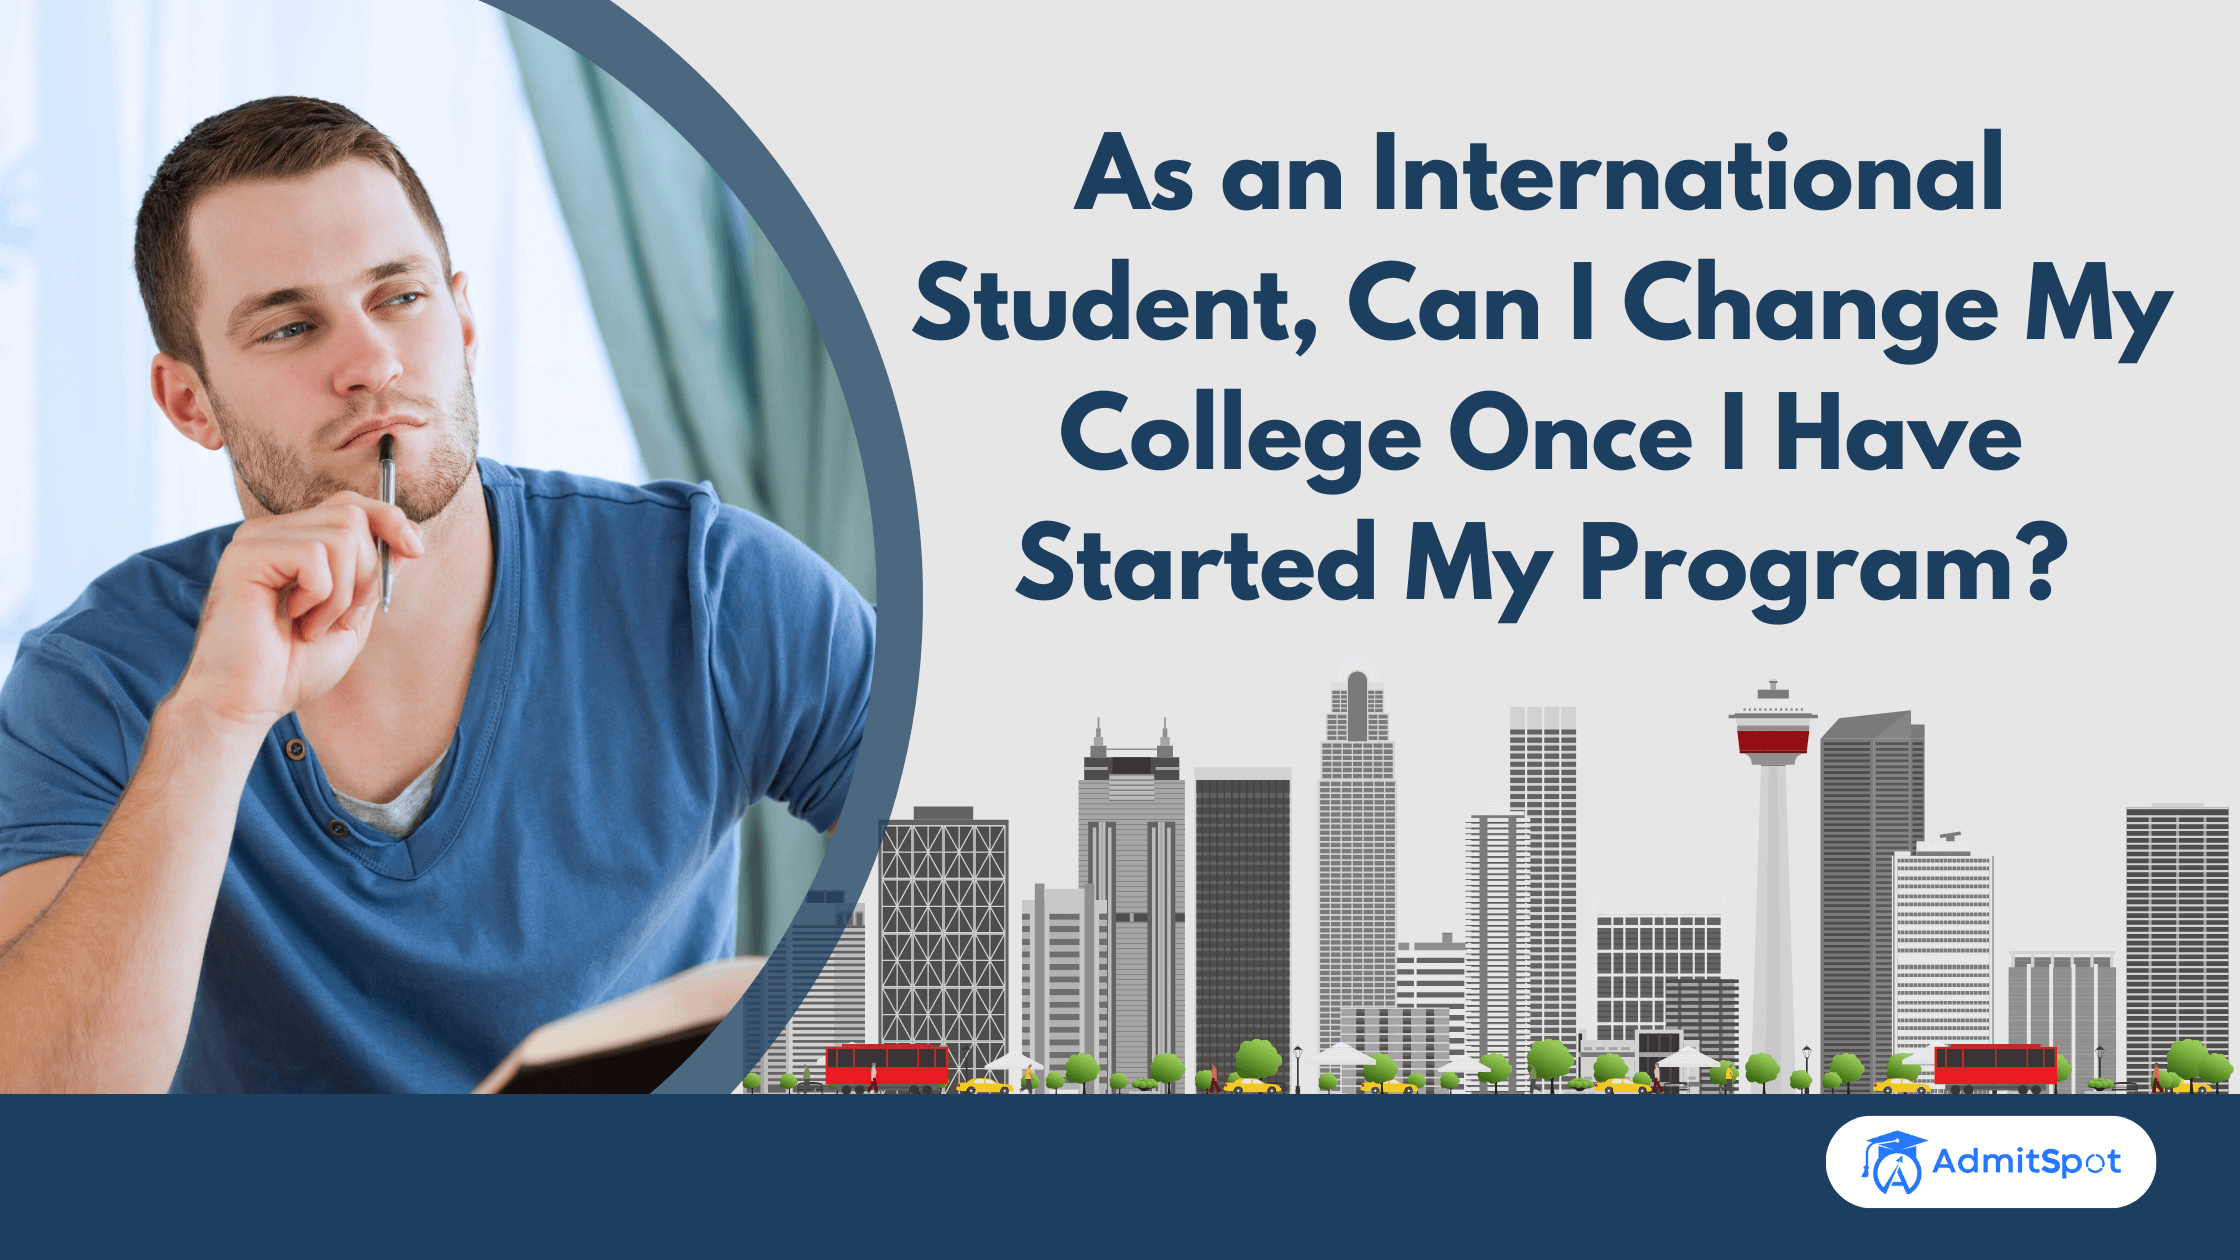 As An International Student, Can I Change My College Once I Have Started My Program?